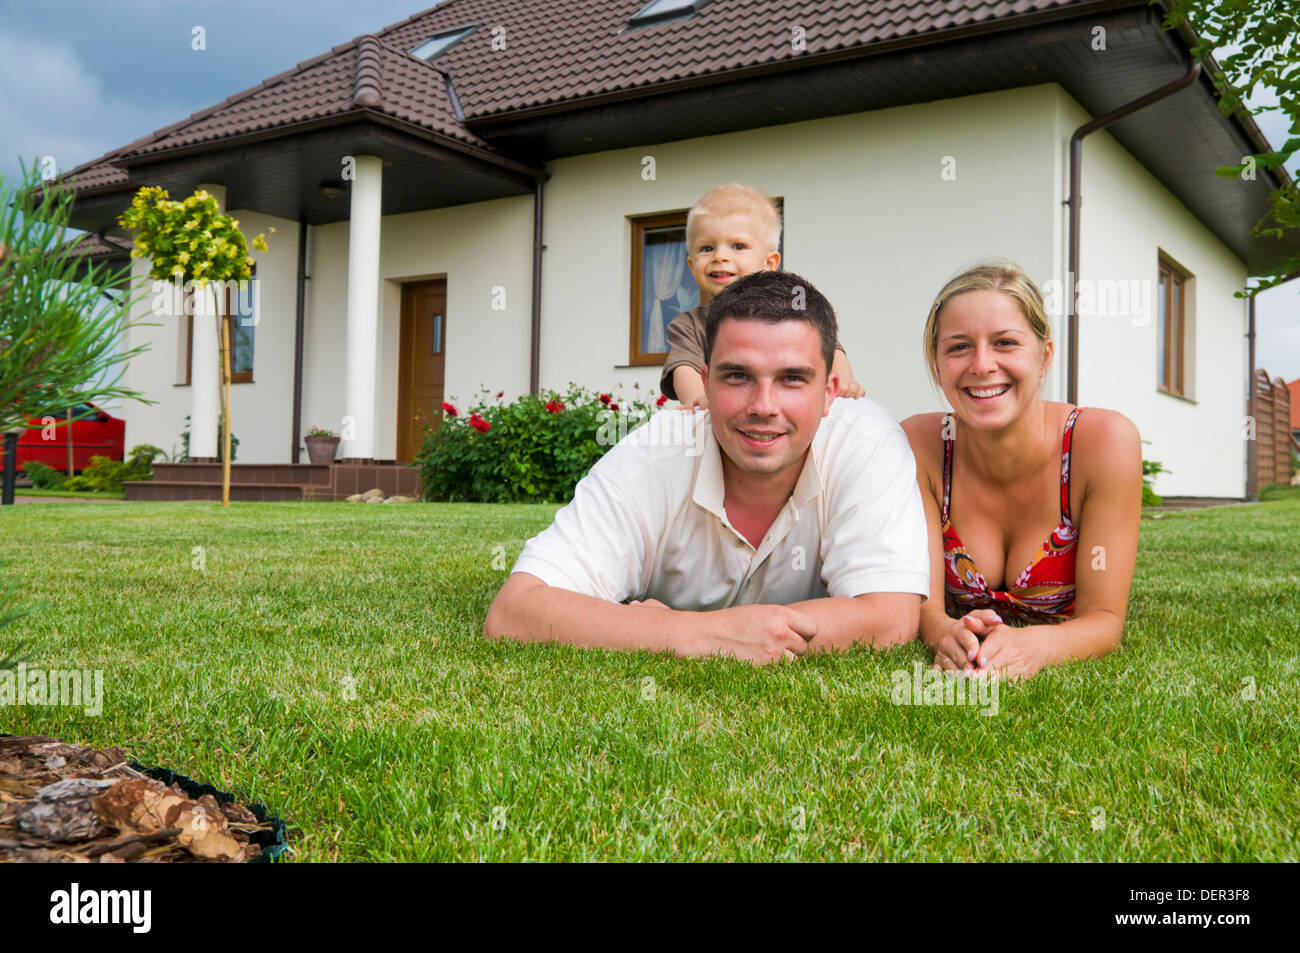 A happy family in front of their house in the garden Stock Photo